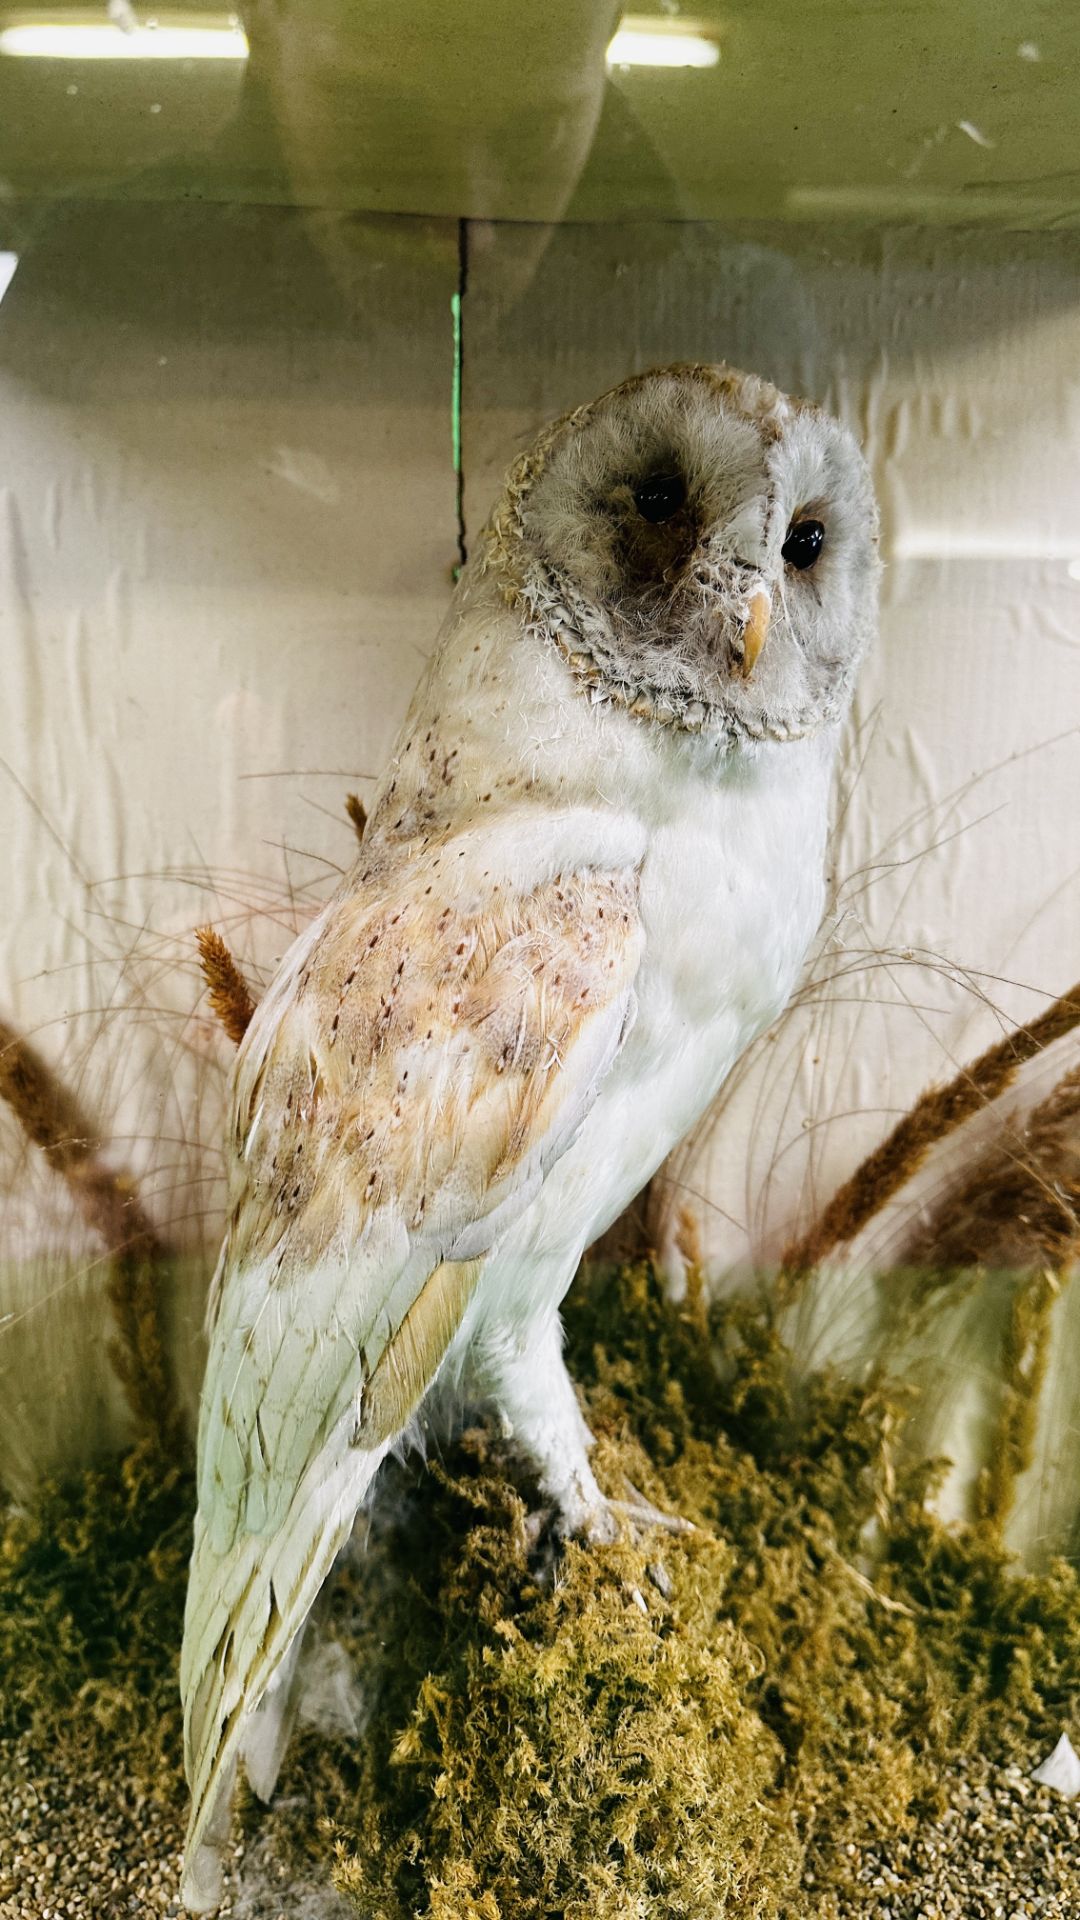 A CASED VICTORIAN TAXIDERMY STUDY OF A OWL, W 43CM X D 24CM X H 48CM. - Image 4 of 8